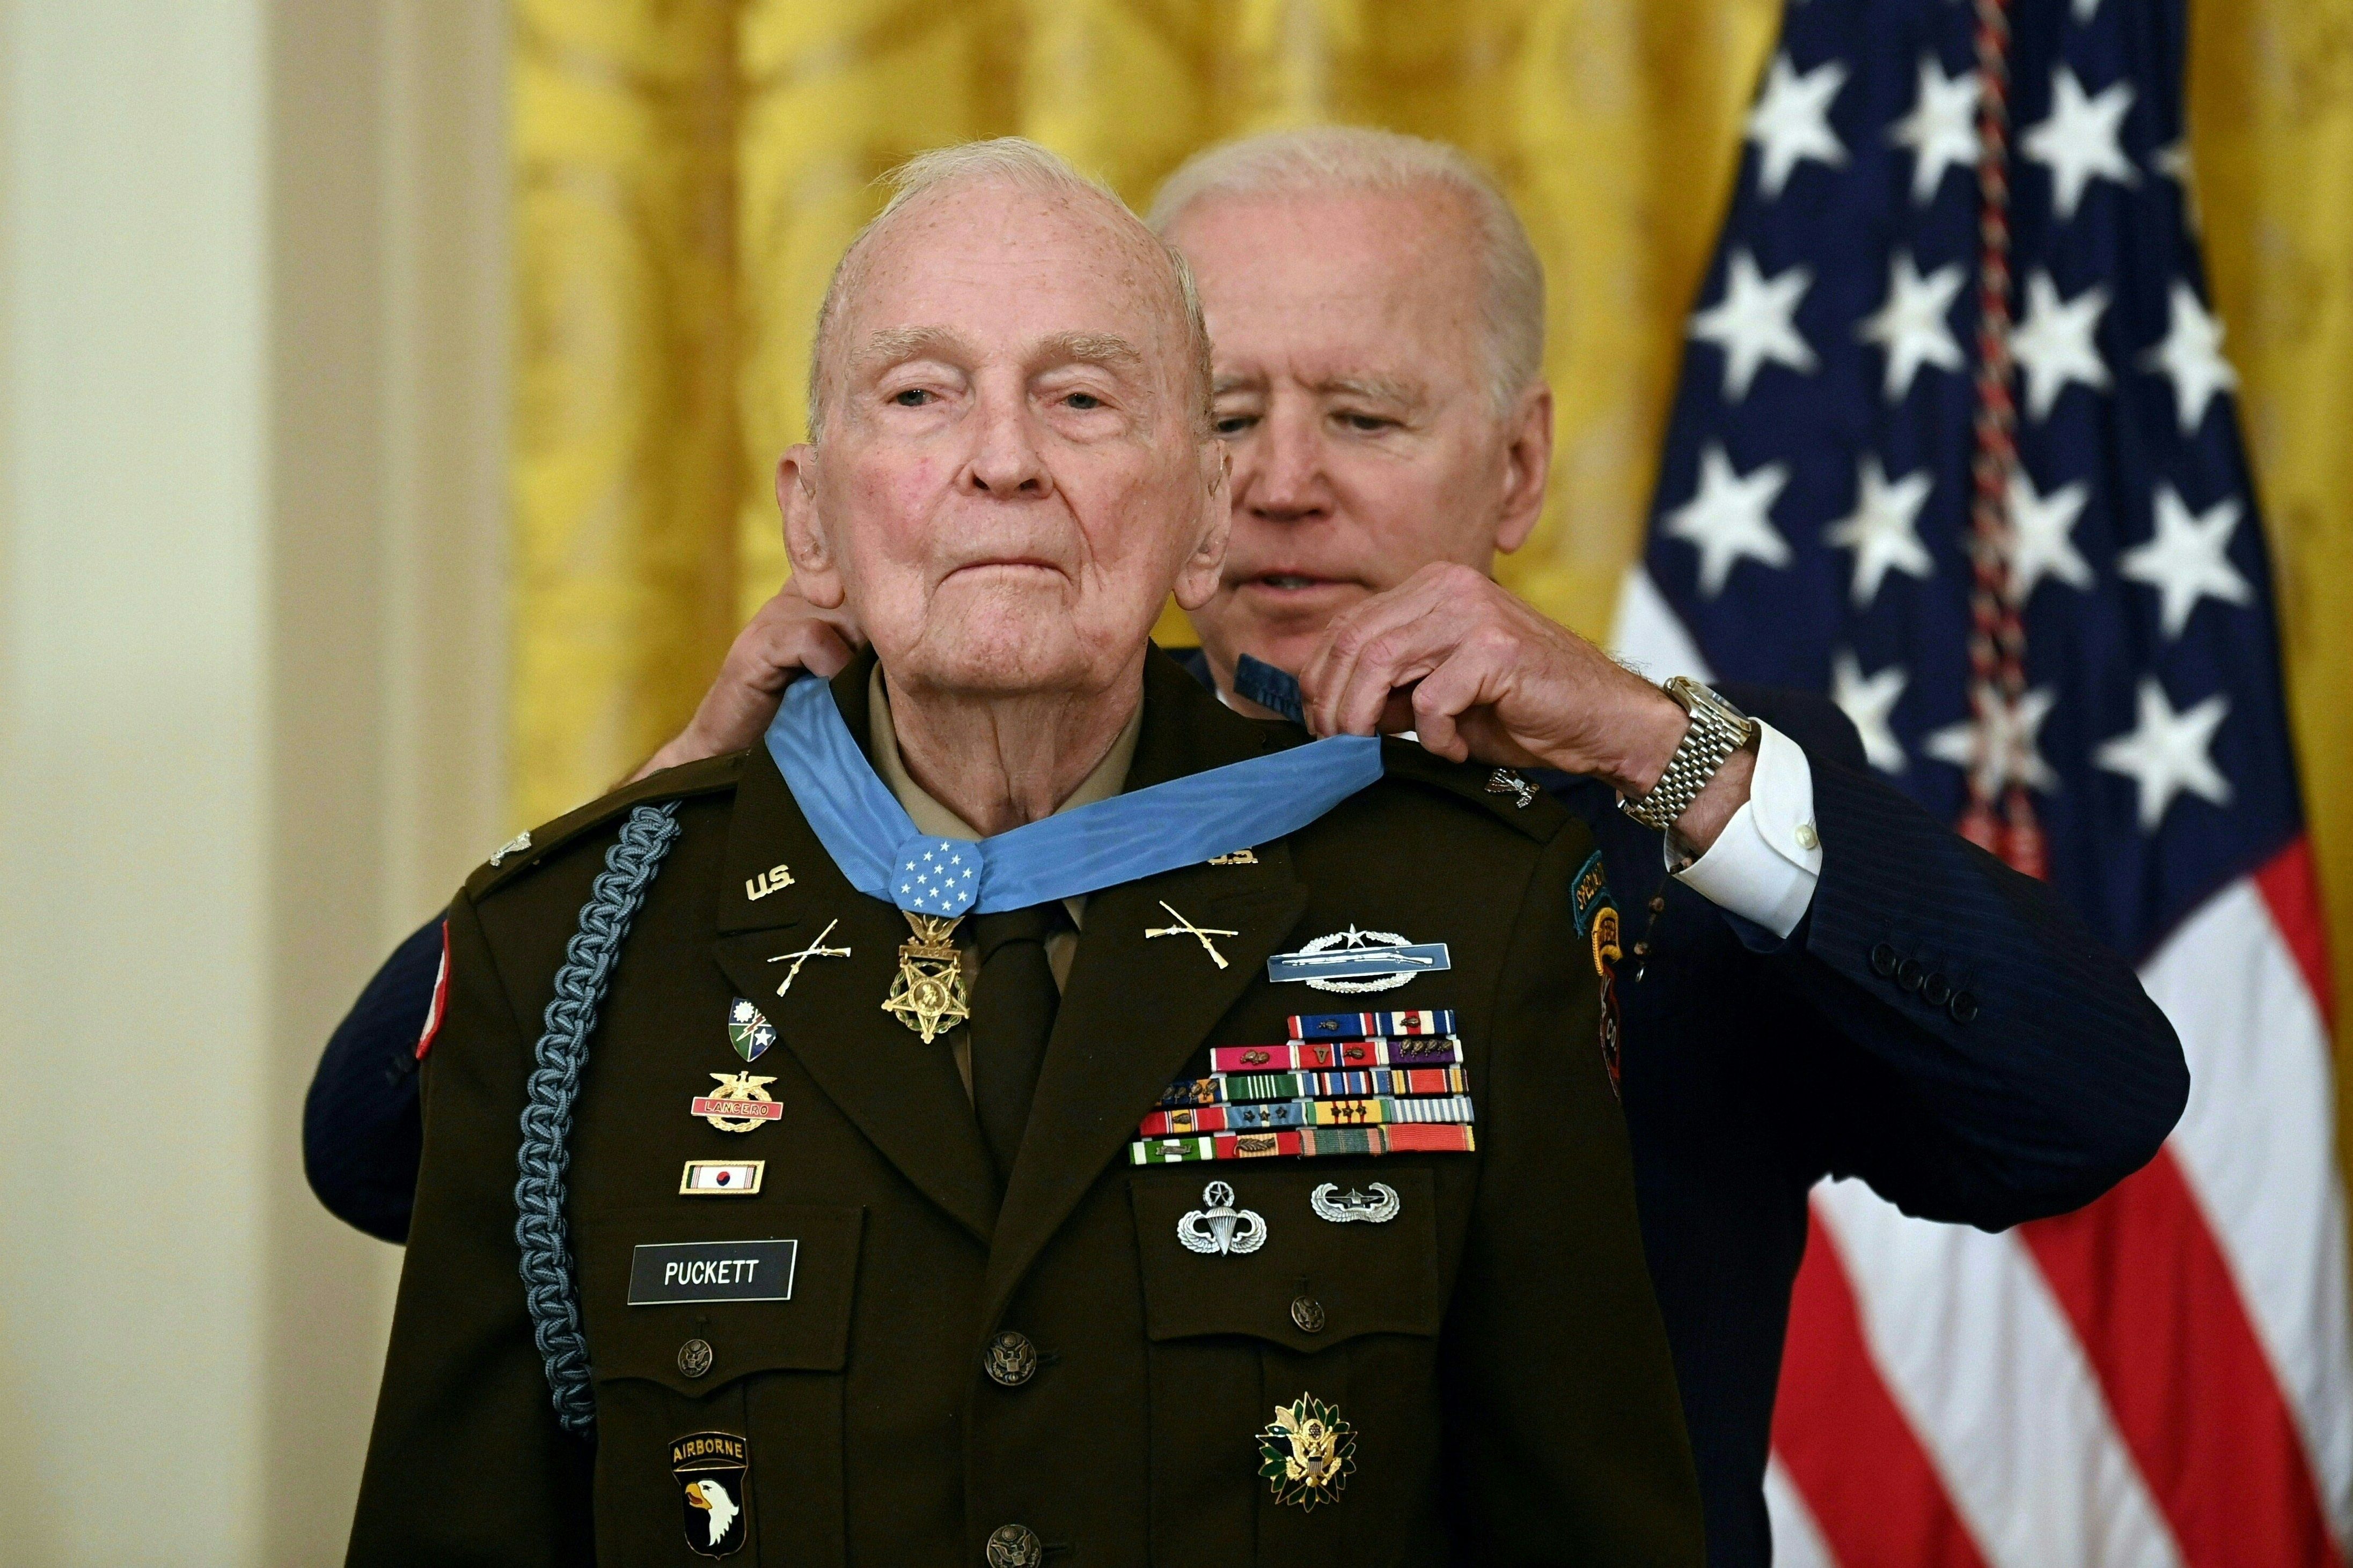 Puckett received his Medal of Honour from President Biden in 2021